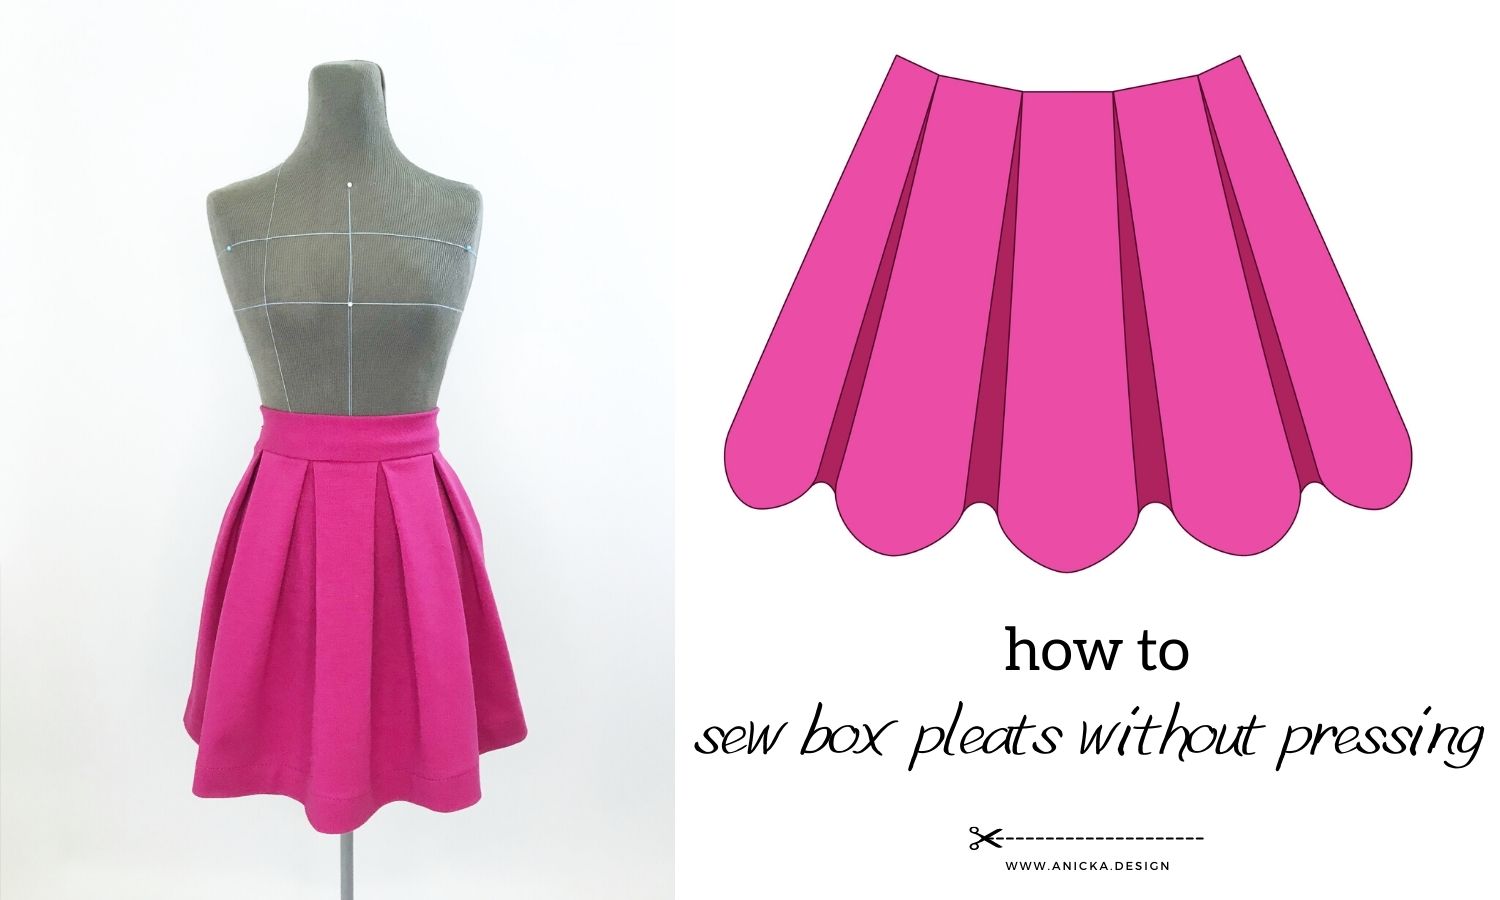 How to sew box pleats without pressing.